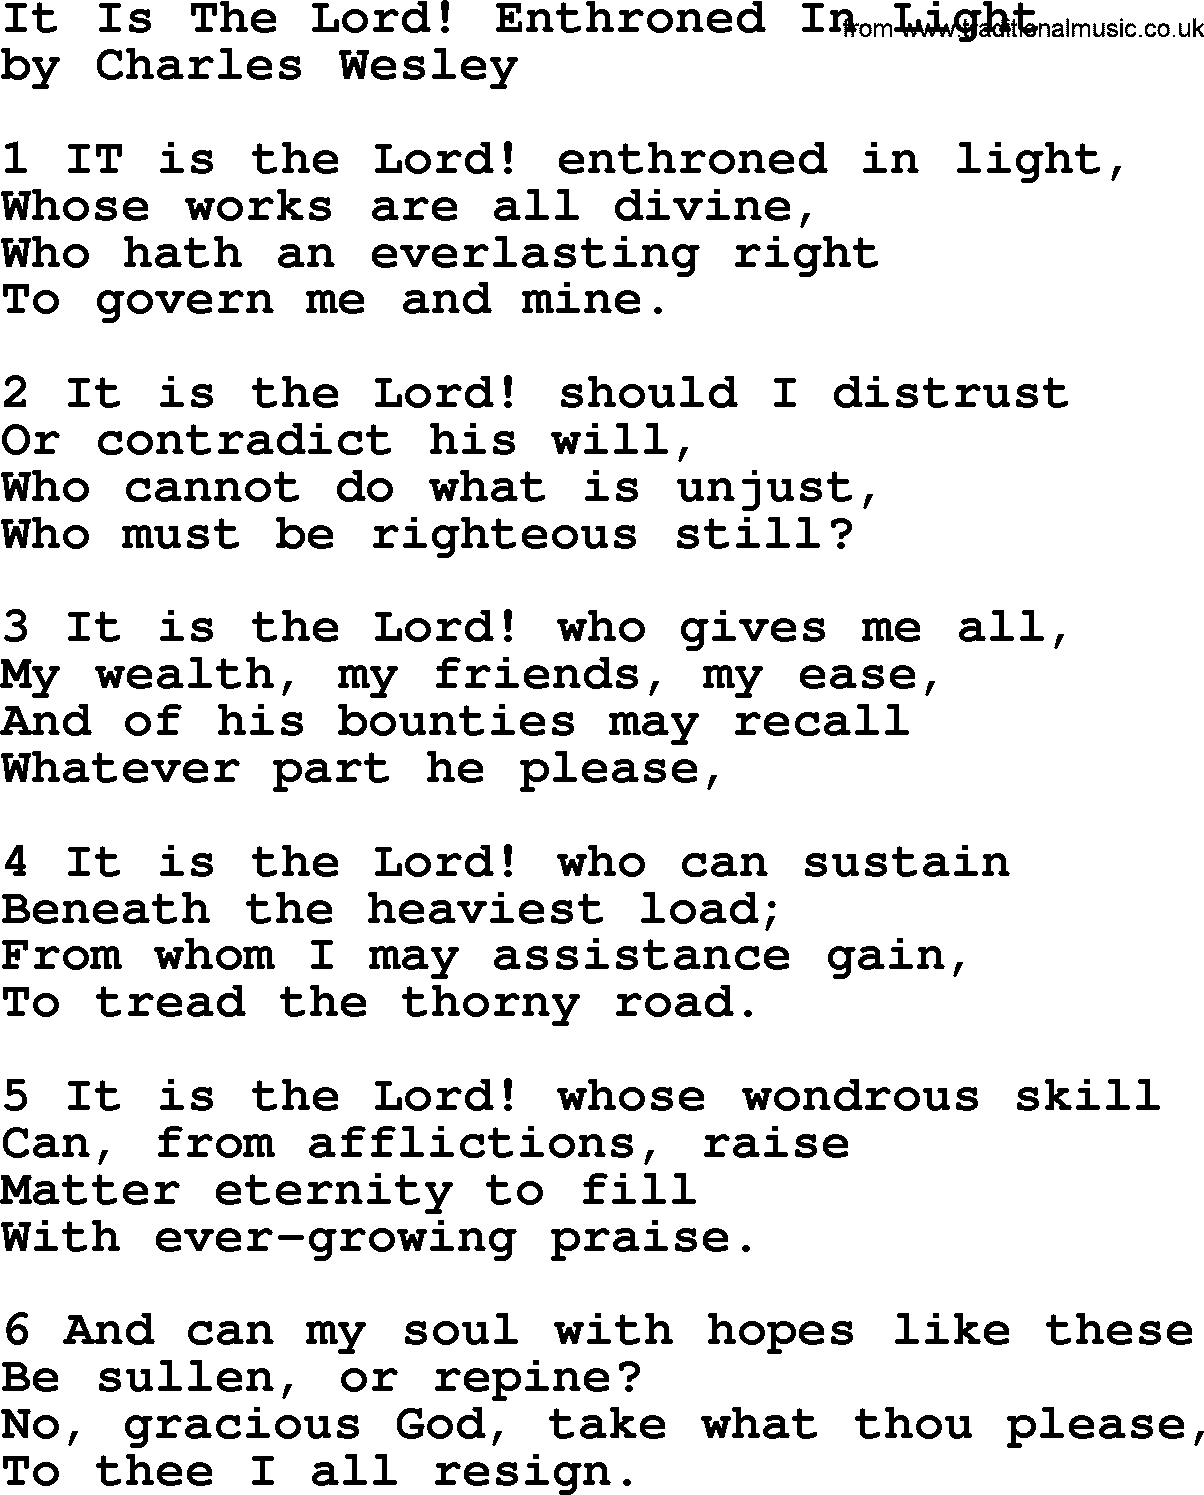 Charles Wesley hymn: It Is The Lord! Enthroned In Light, lyrics